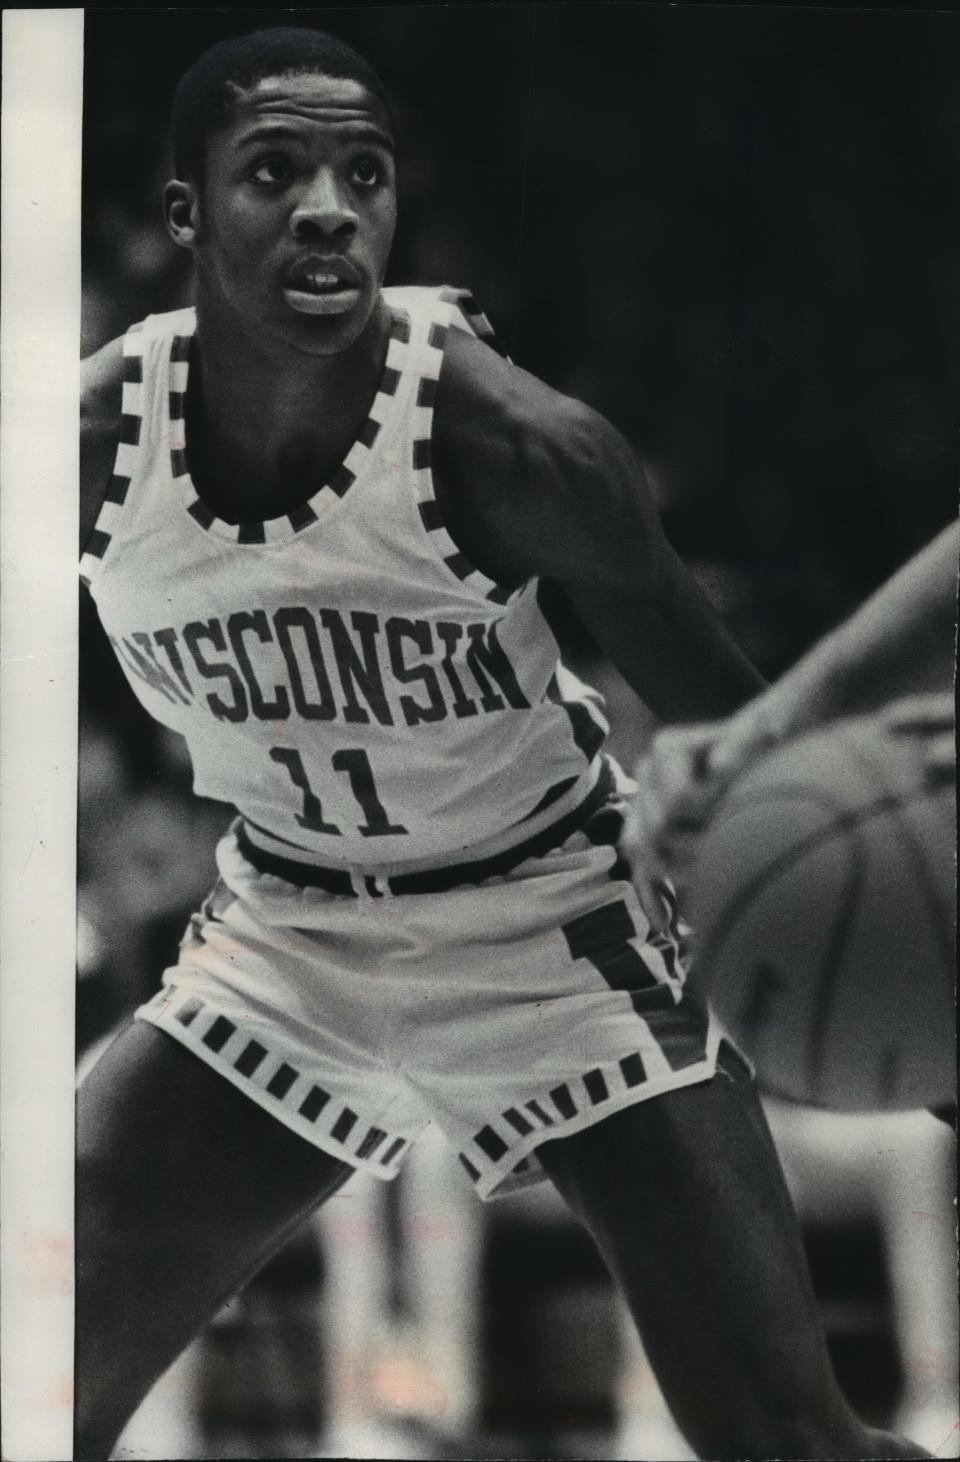 Few people represent the Wisconsin-Marquette rivalry better than the name Wes Matthews. This Wes Matthews attended UW and made a game-saving block against Marquette in 1979. His son, Wesley Jr., attended high school in Madison and played college ball at Marquette.